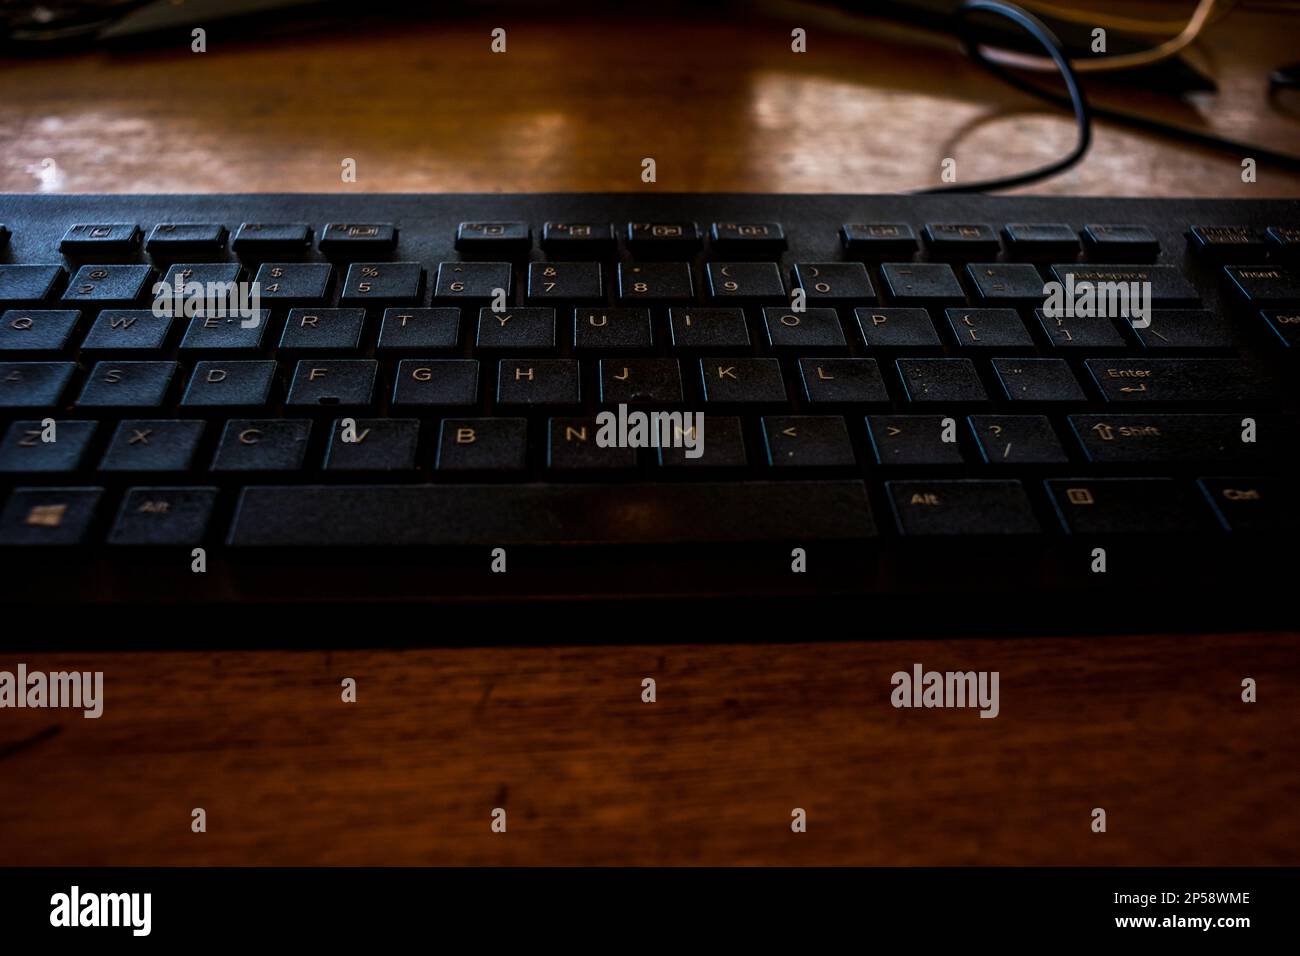 A black wired computer keyboard Stock Photo